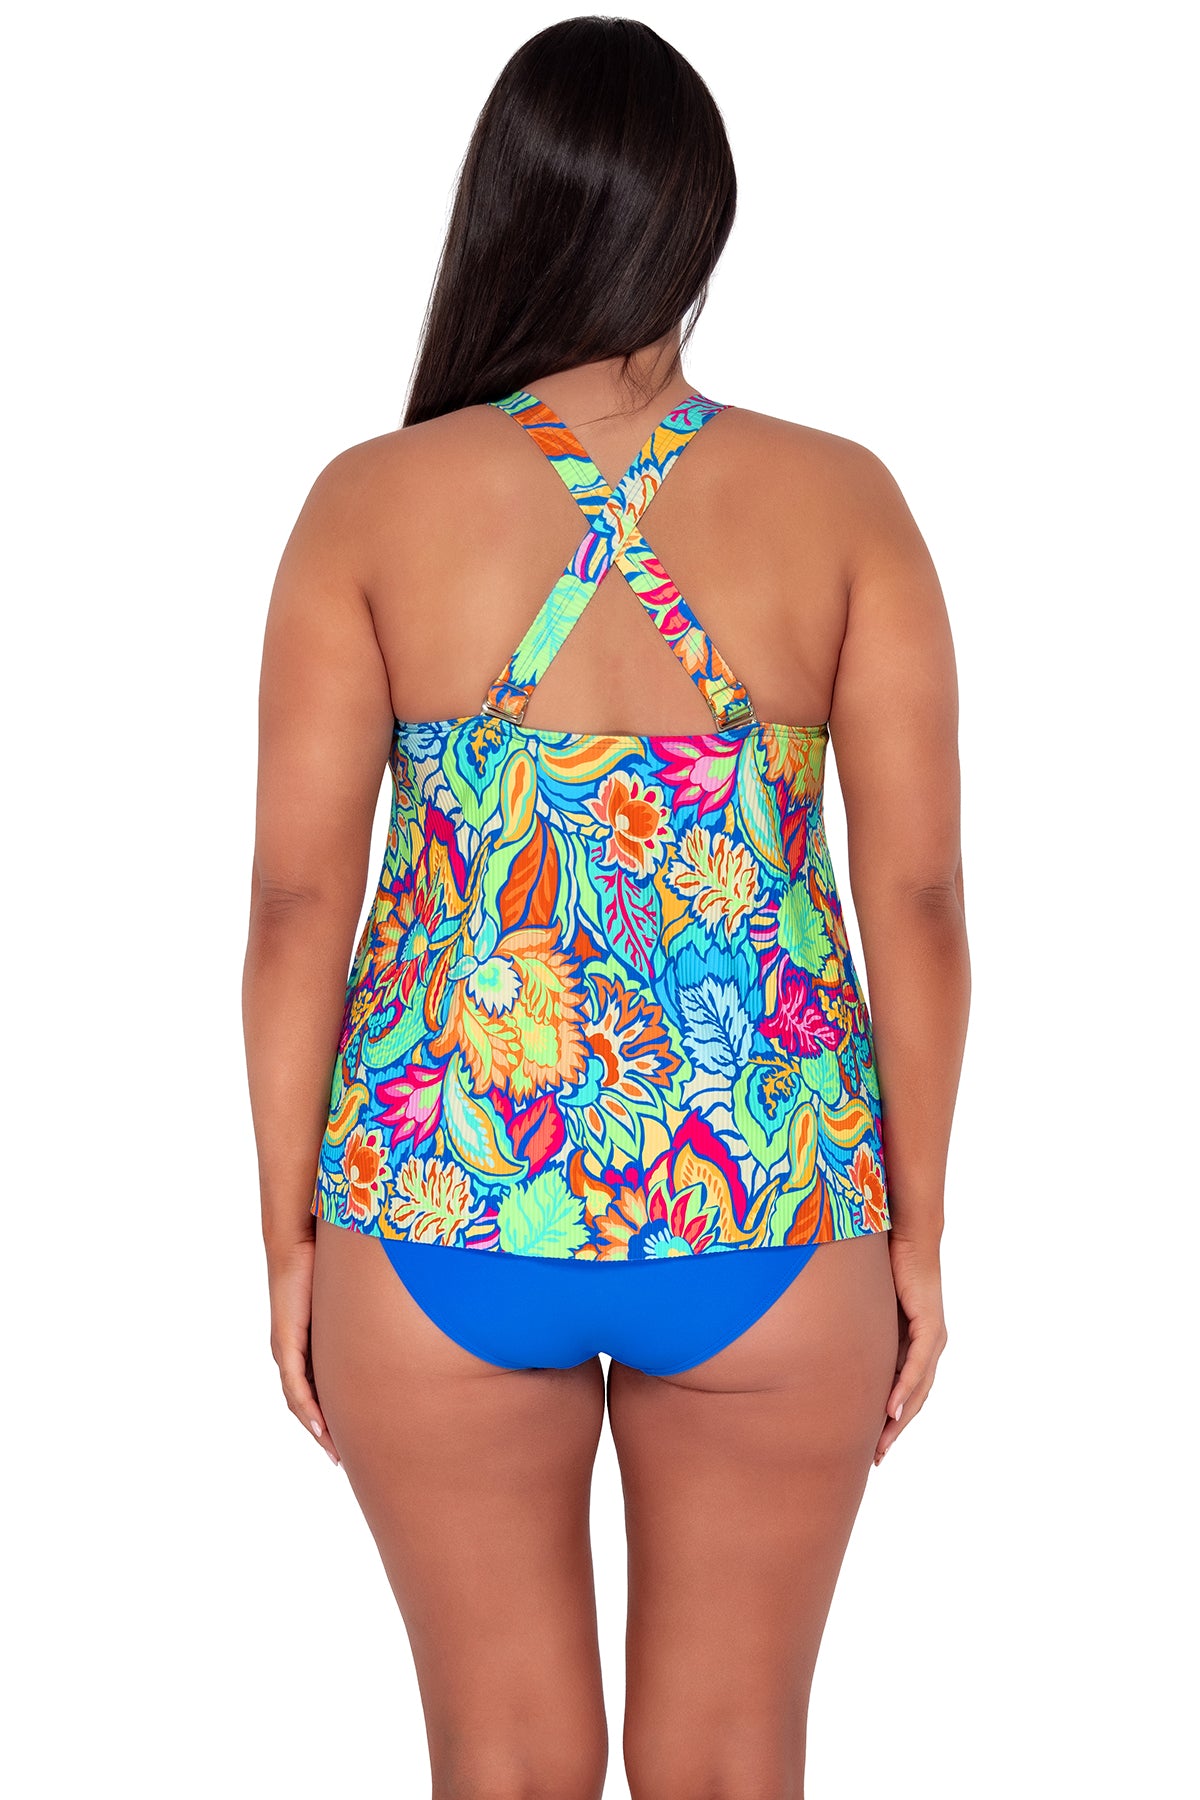 pose #1 of Nicki wearing Sunsets Escape Fiji Sandbar Rib Sadie Tankini Top showing crossback straps paired with Hannah High Waist in Electric Blue